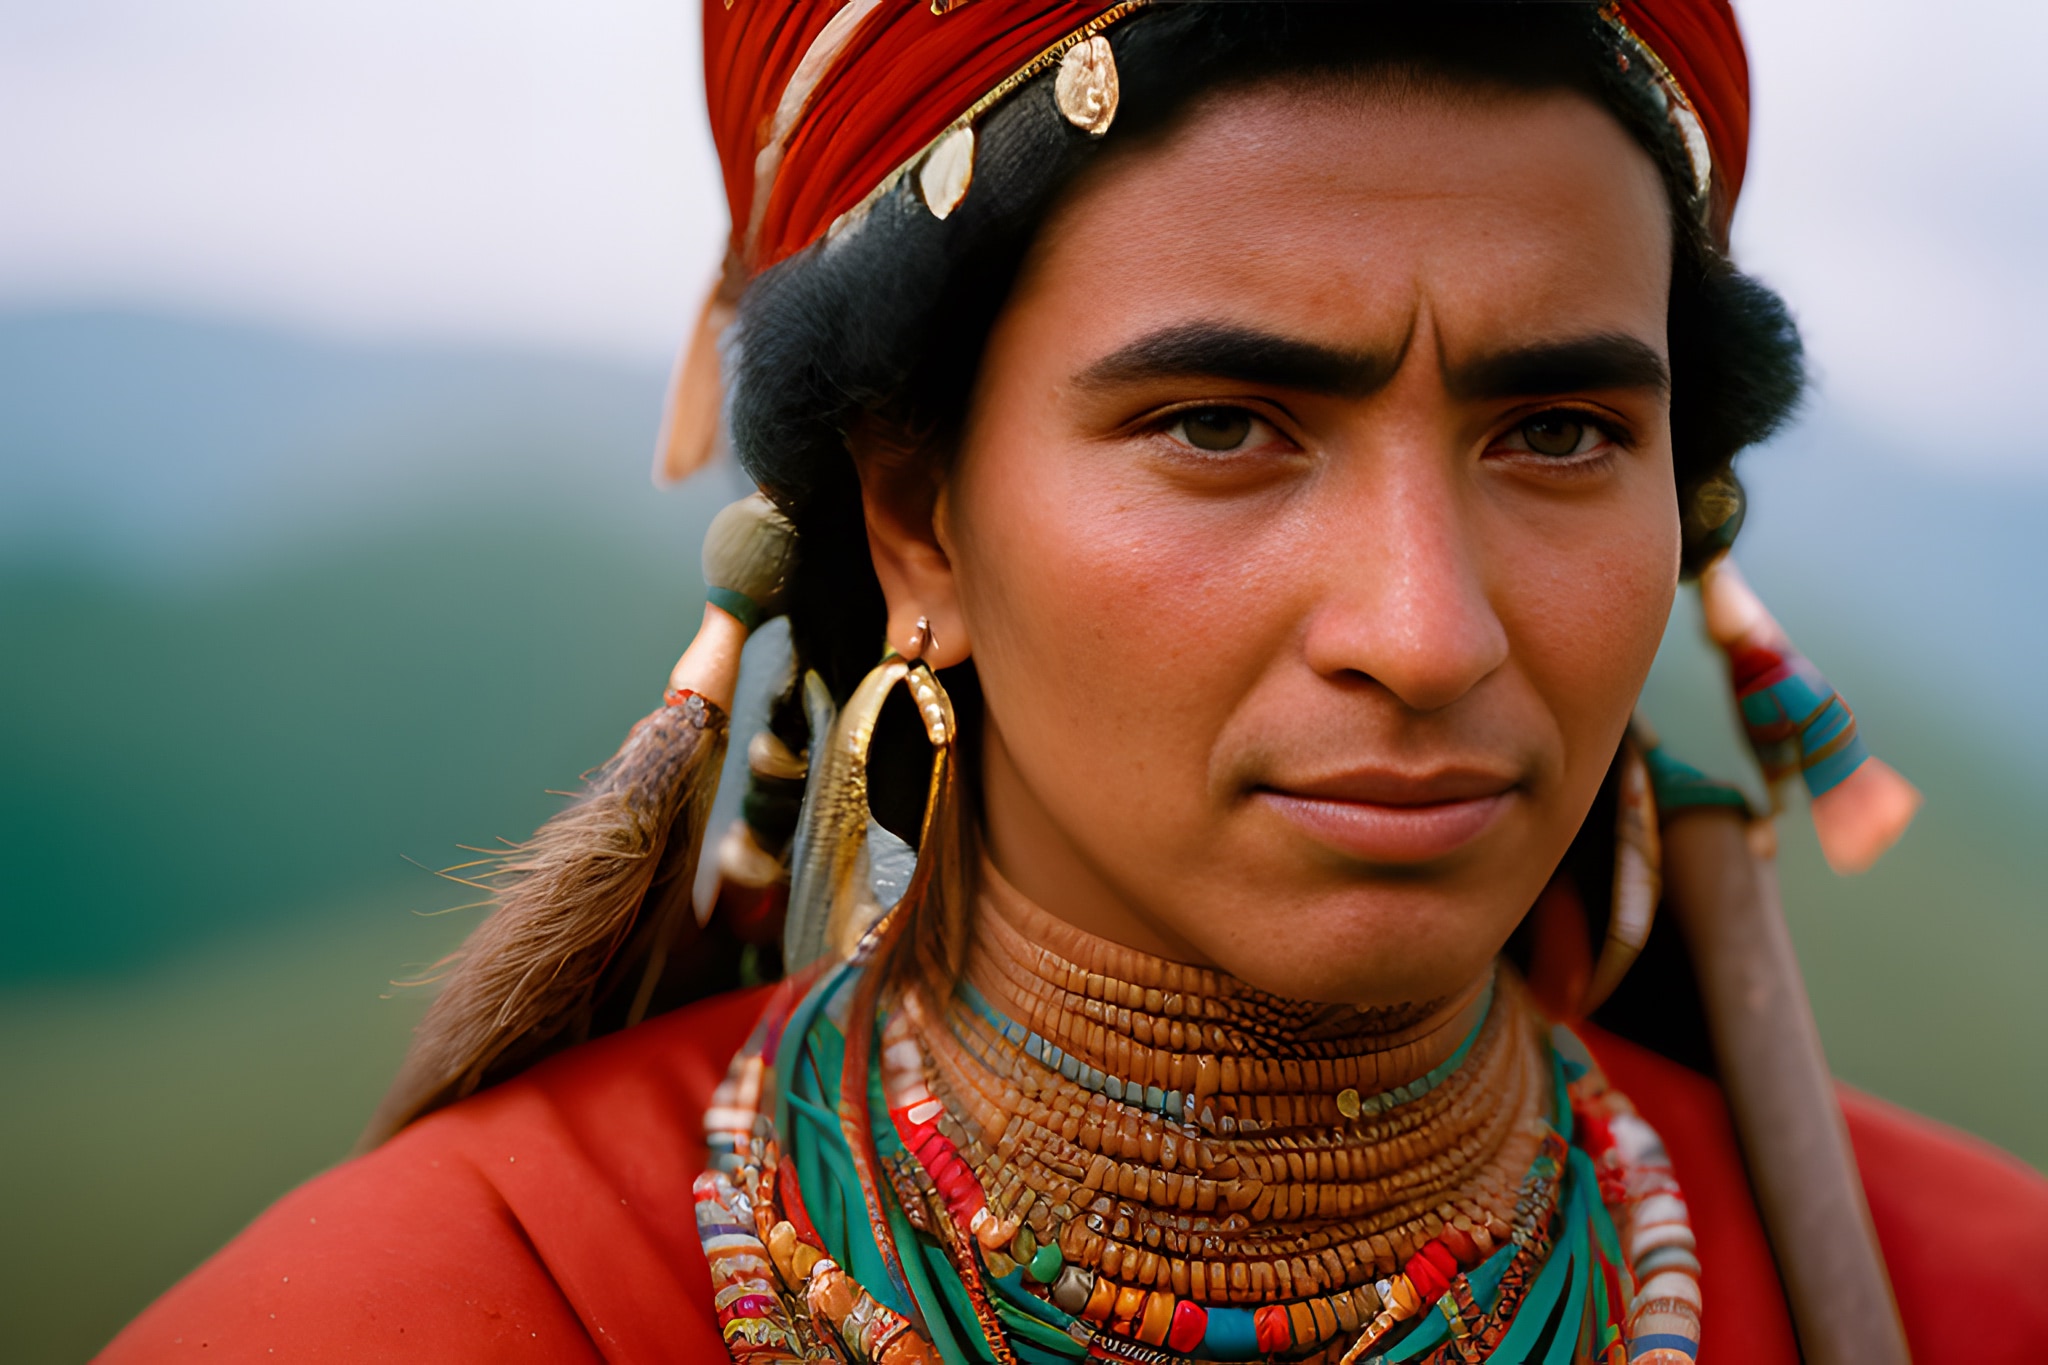 Portrait-of-a-one-person-Tribe-face-focused-somt